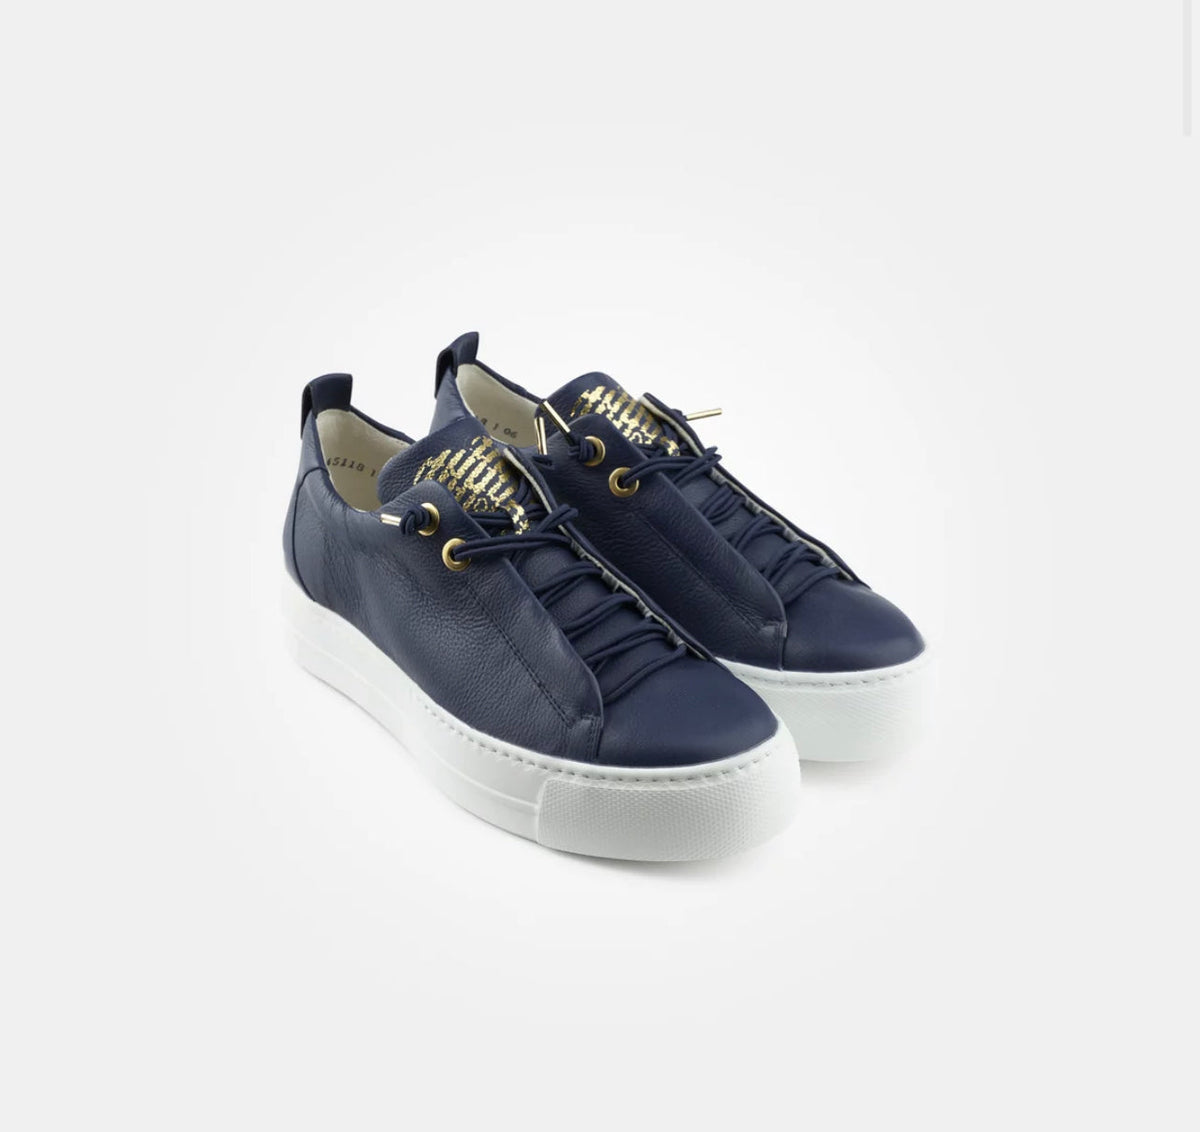 Paul Green - 5017 Navy Leather Elastic Trainer*